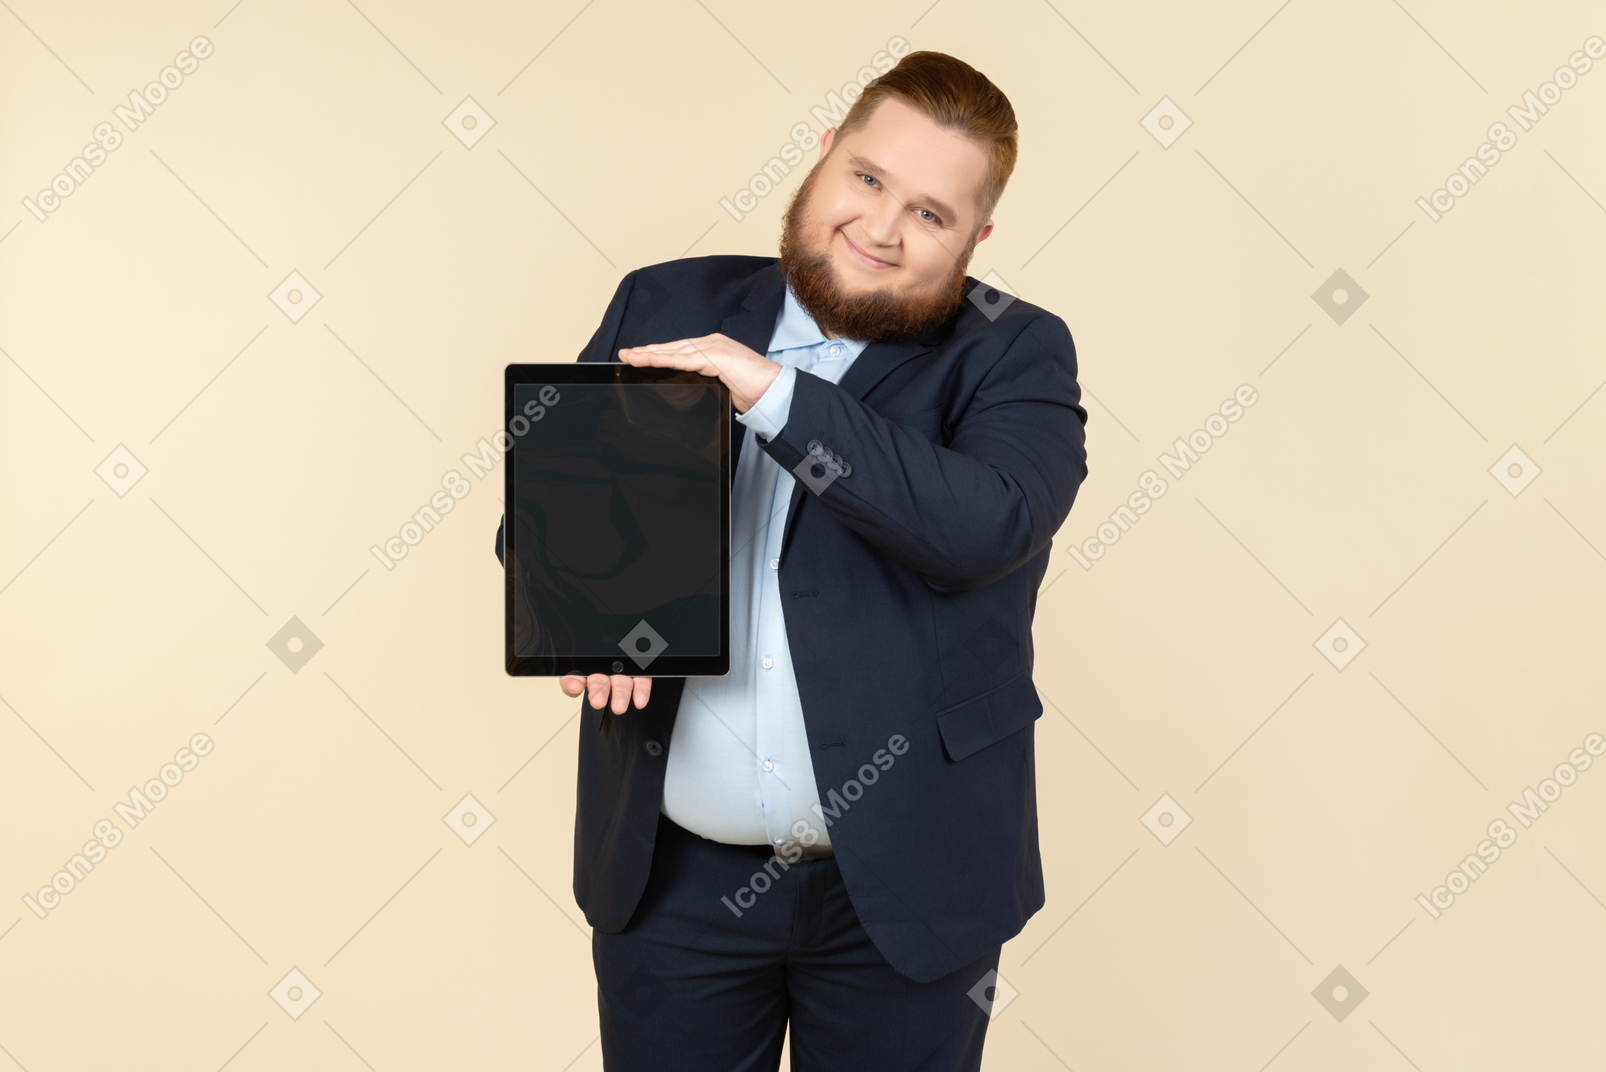 Smiling young overweight office worker holding vertically digital tablet